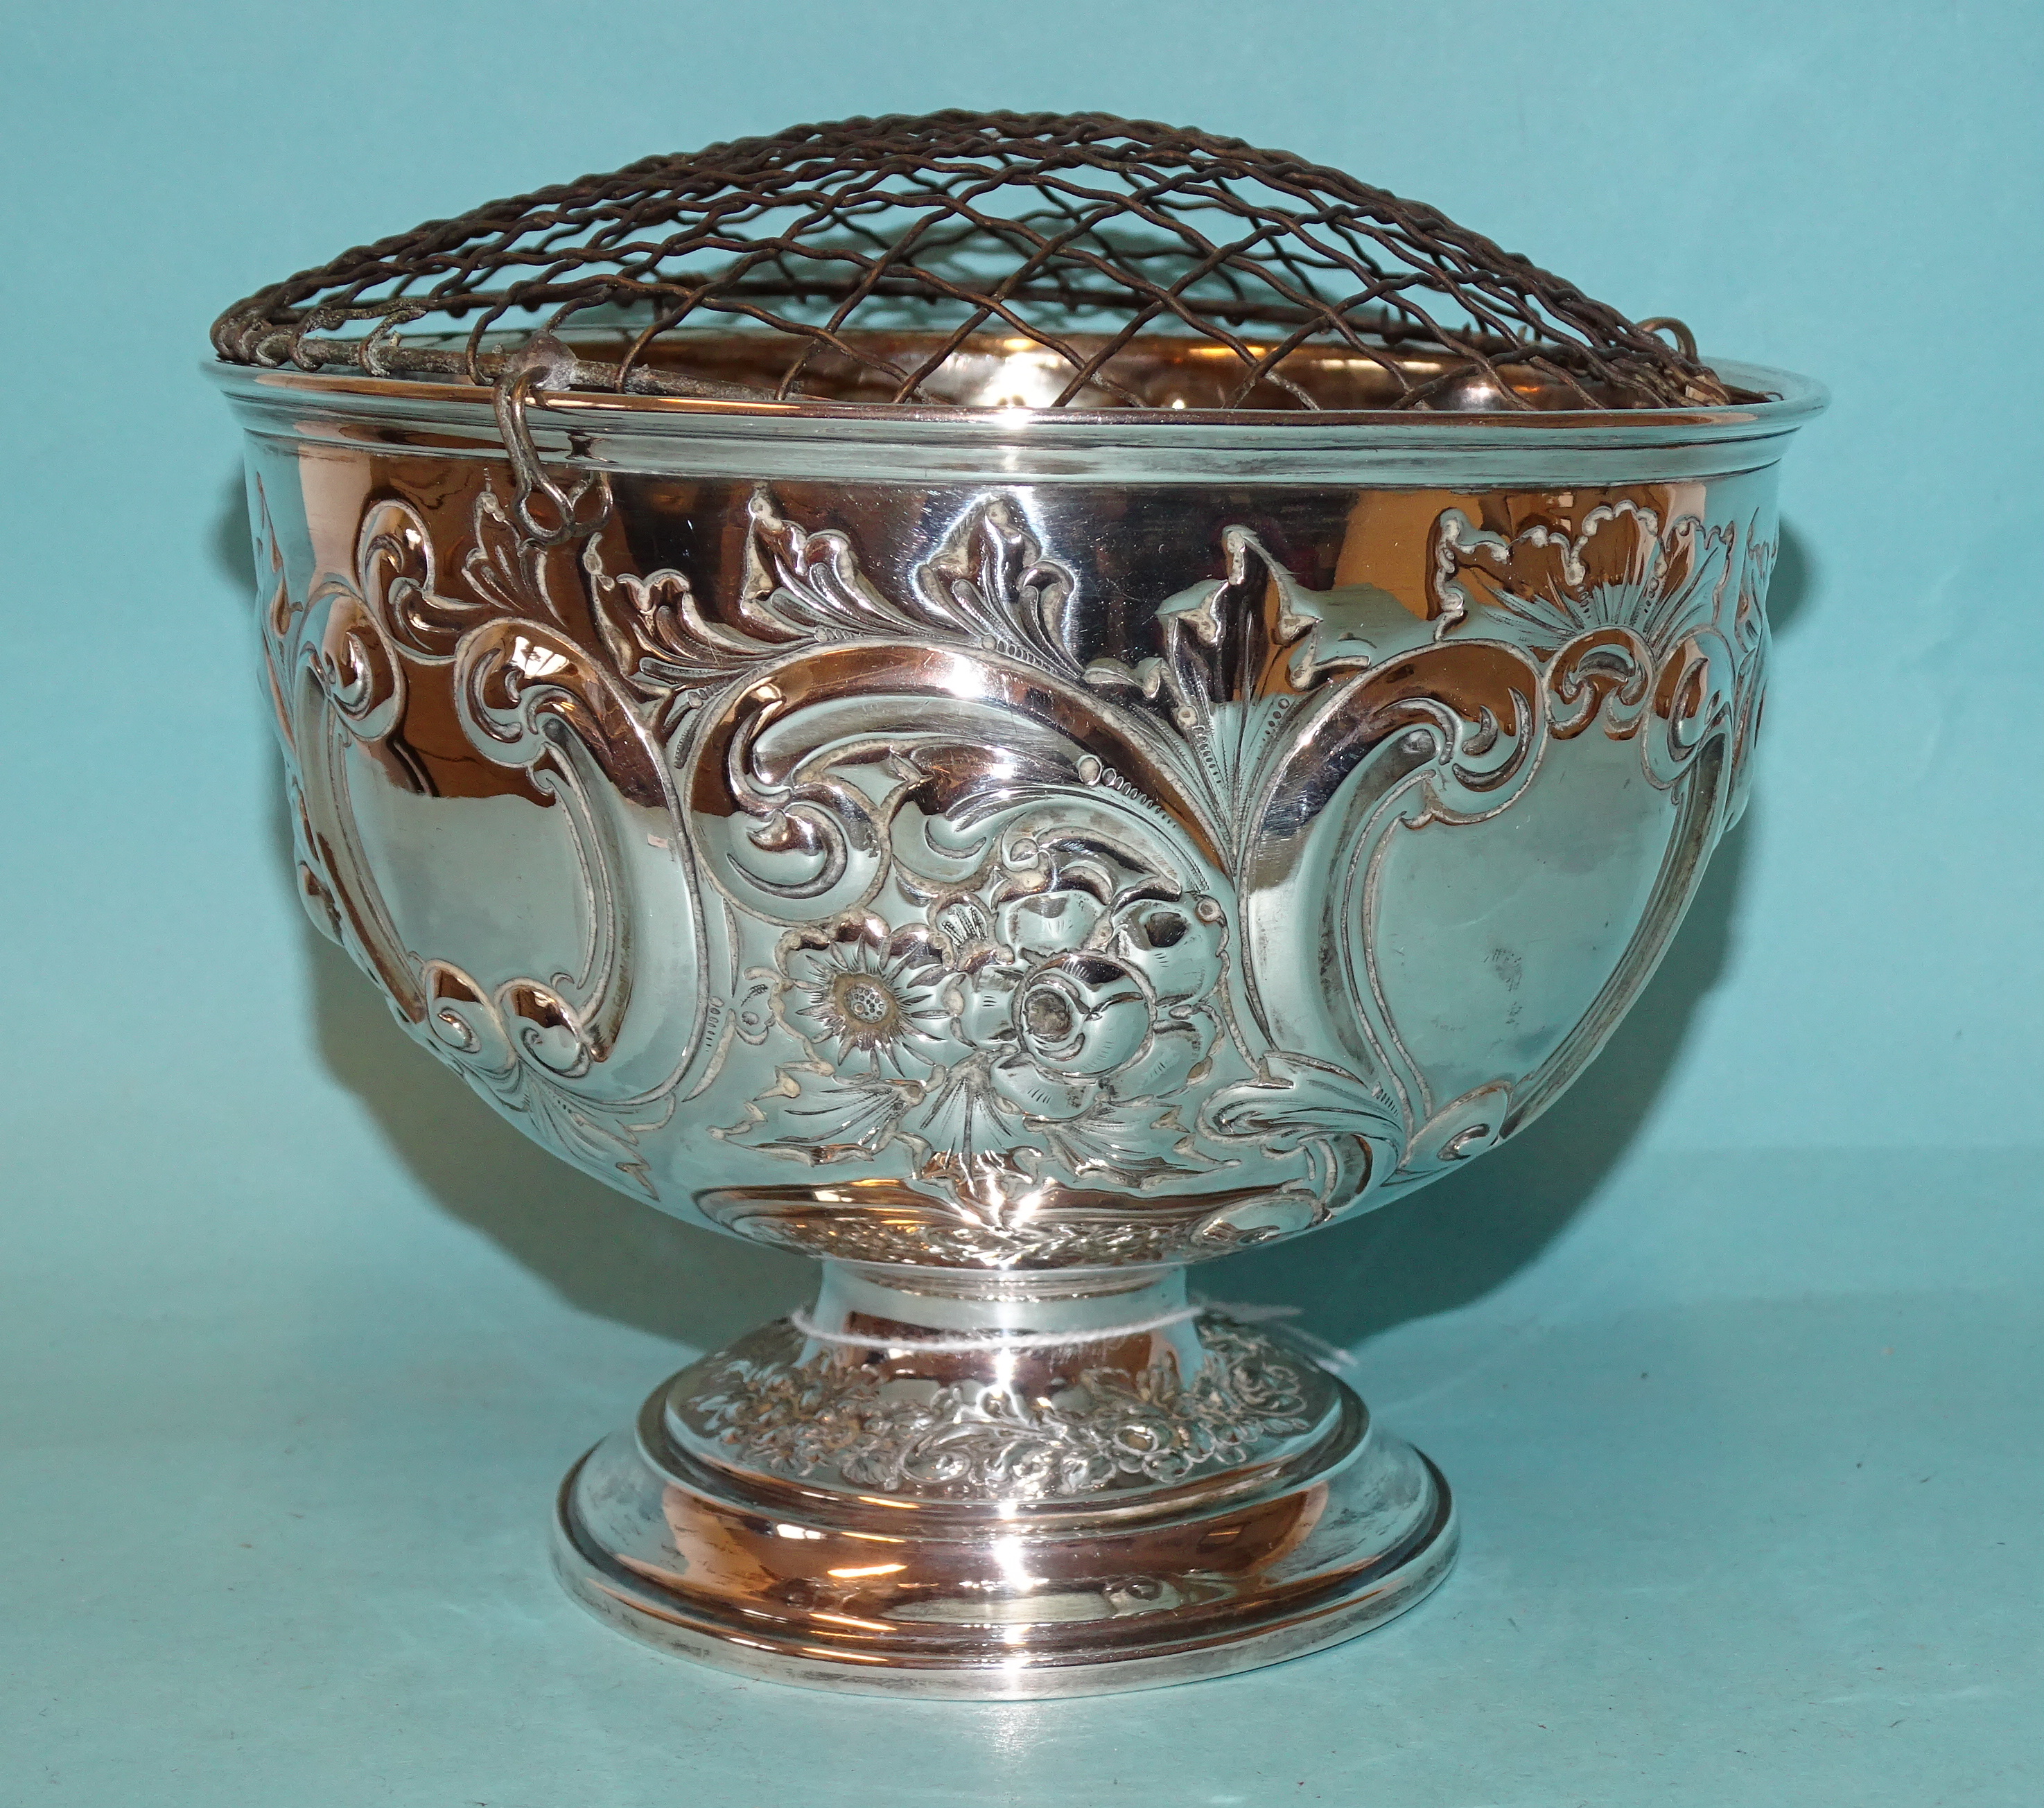 An Edwardian silver pedestal rose bowl with embossed flower and scroll decoration, maker Lee & - Image 2 of 4